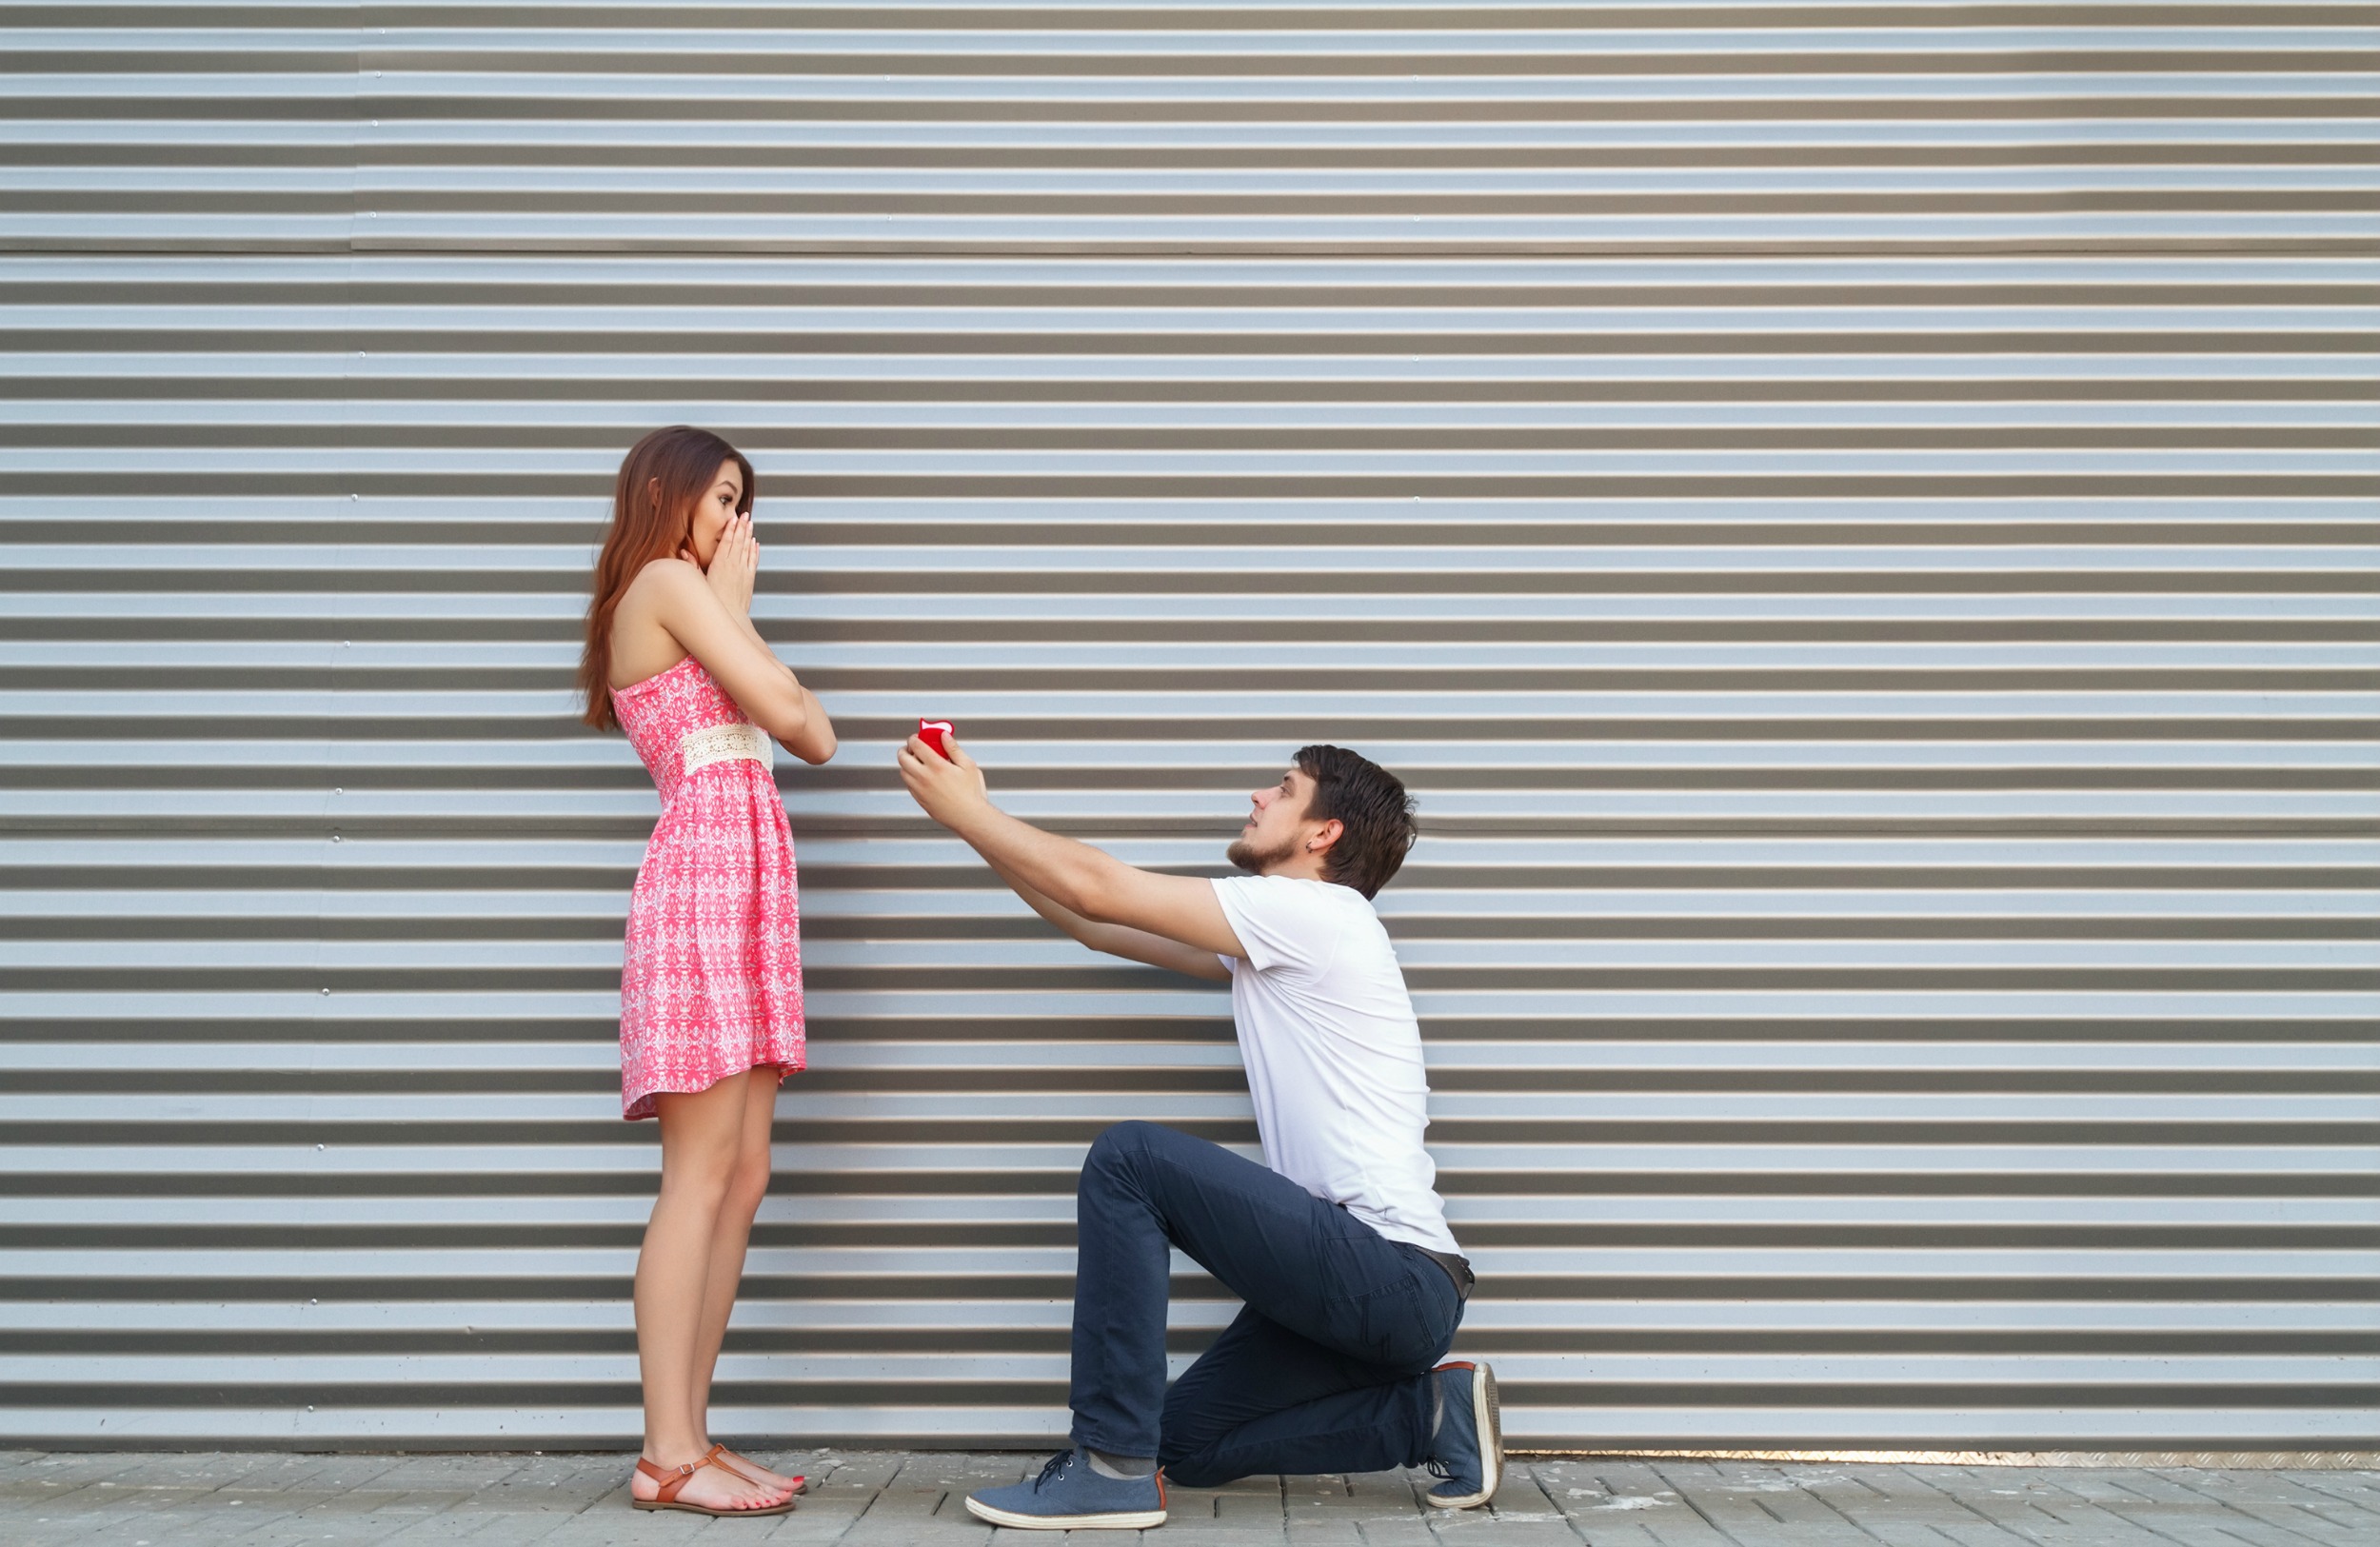 Why Men Historically Propose To Women